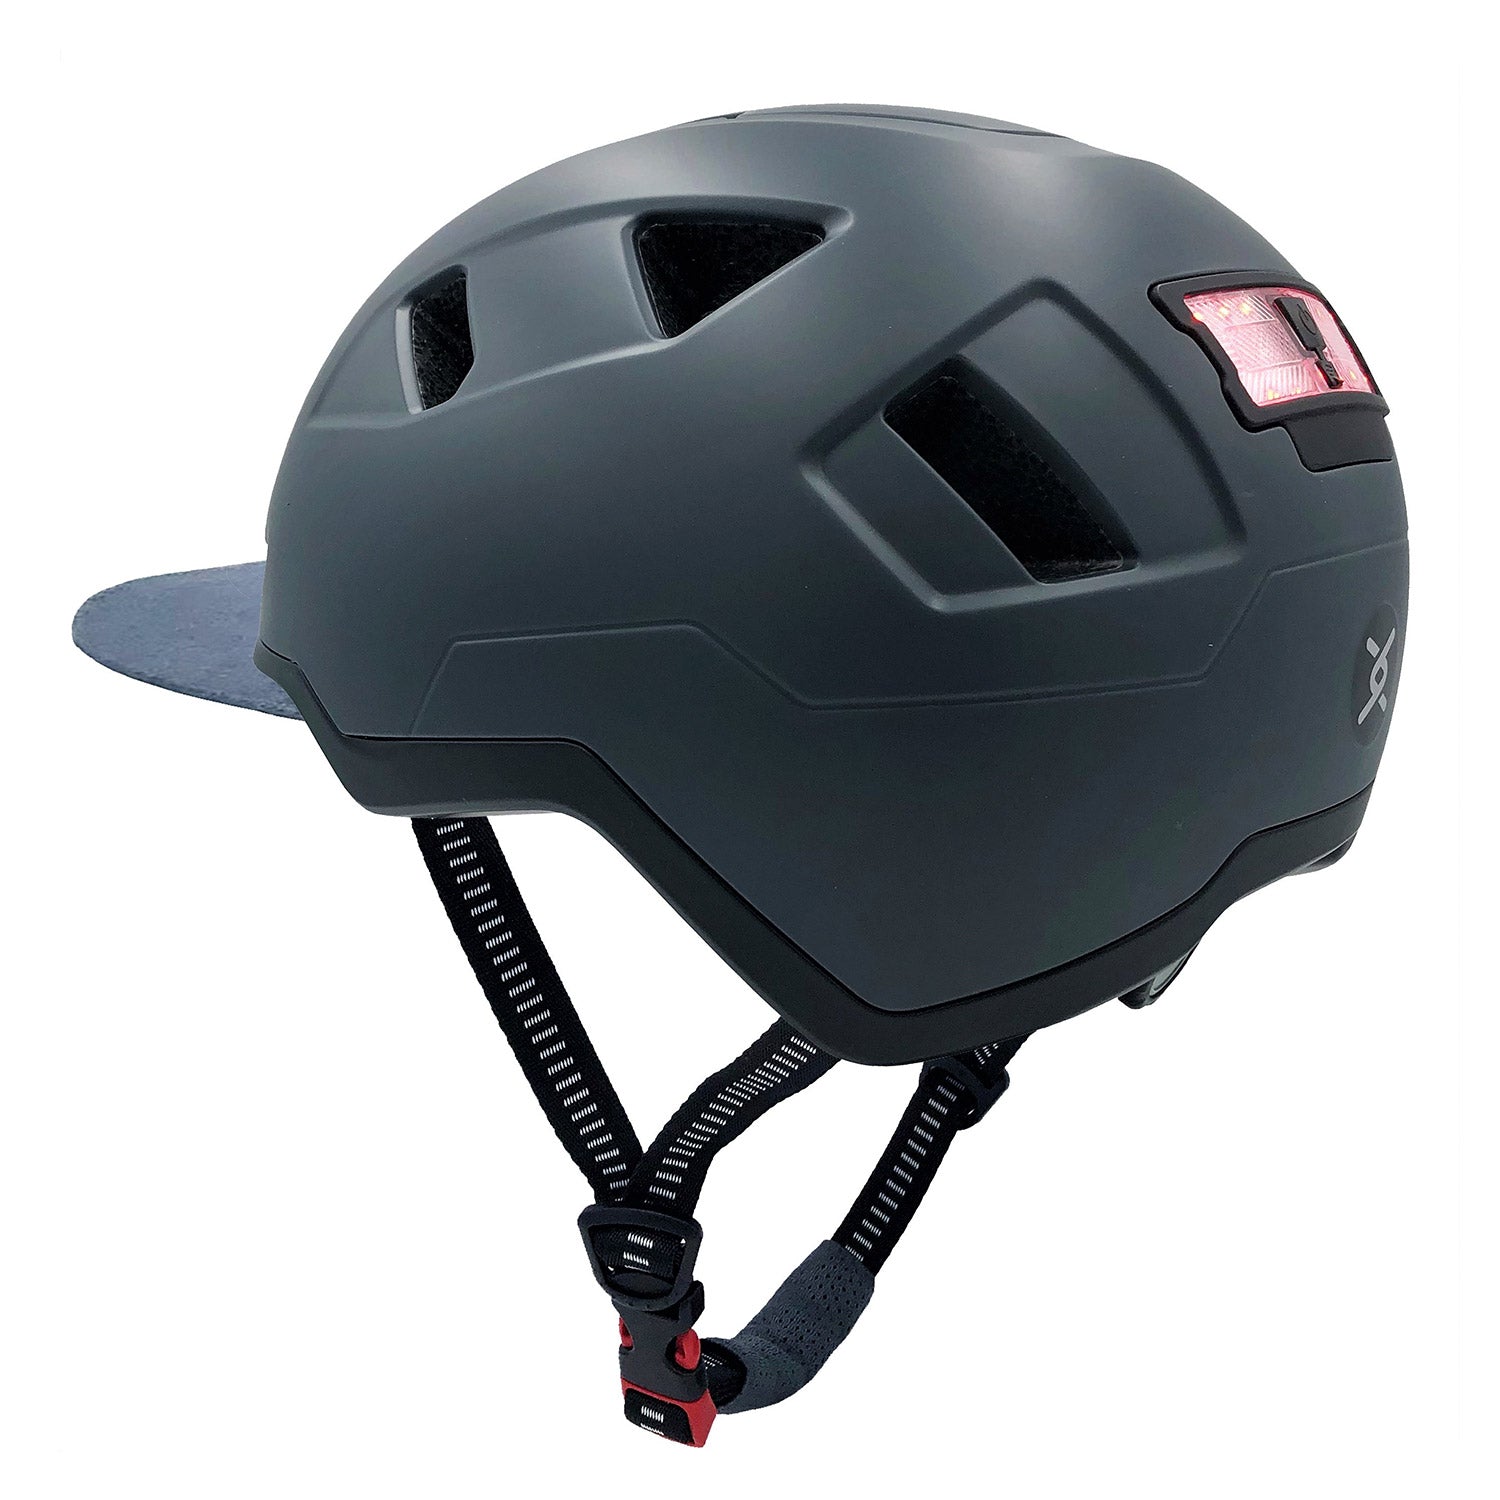 A black e-bike helmet with a chin strap and rear LED lights, the Helmet XNITO by XNITO.